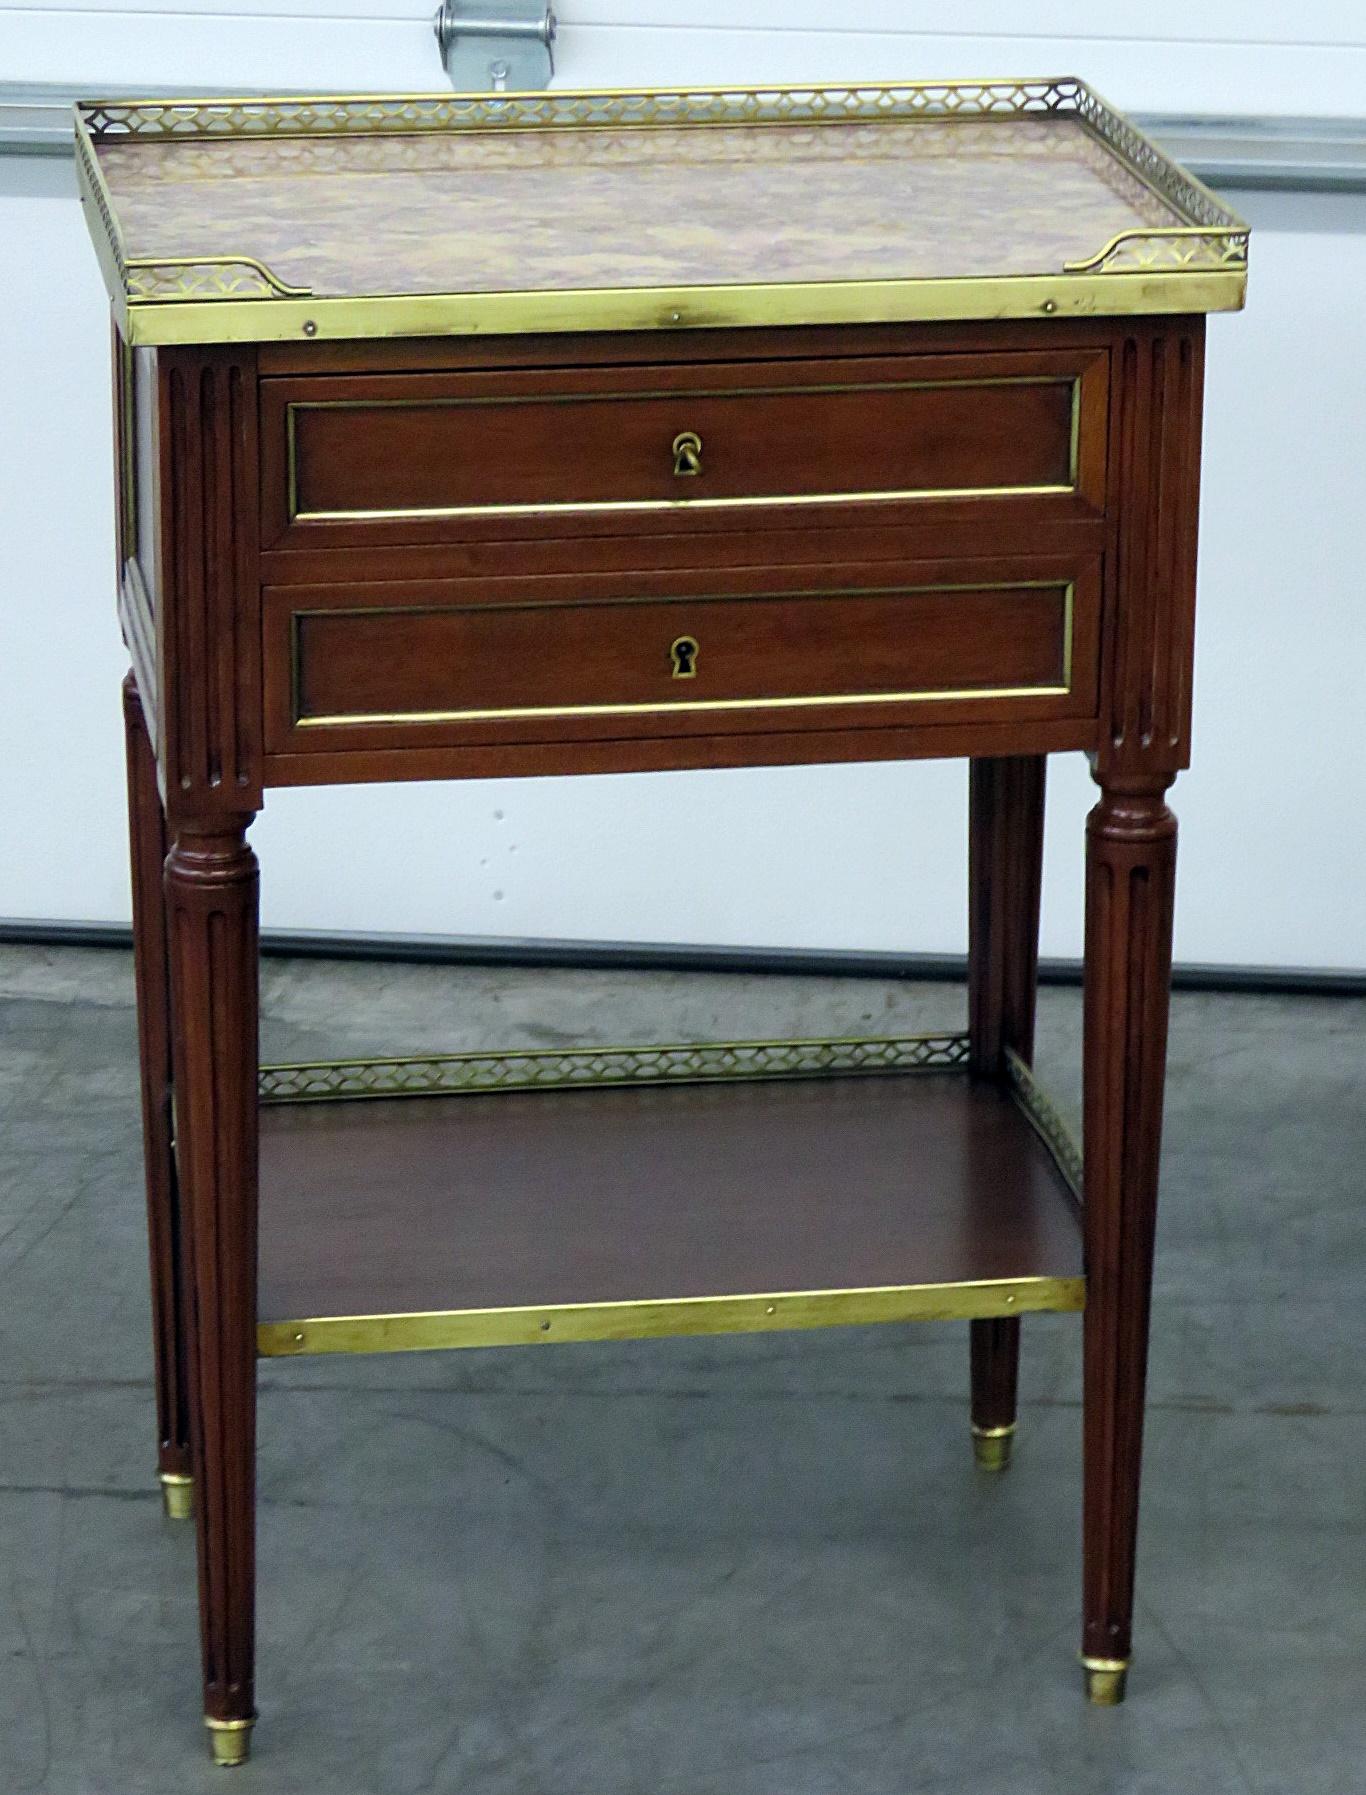 Pair of Maison Jansen Louis XVI style marble top two-drawer end tables with brass mounts and gallery.